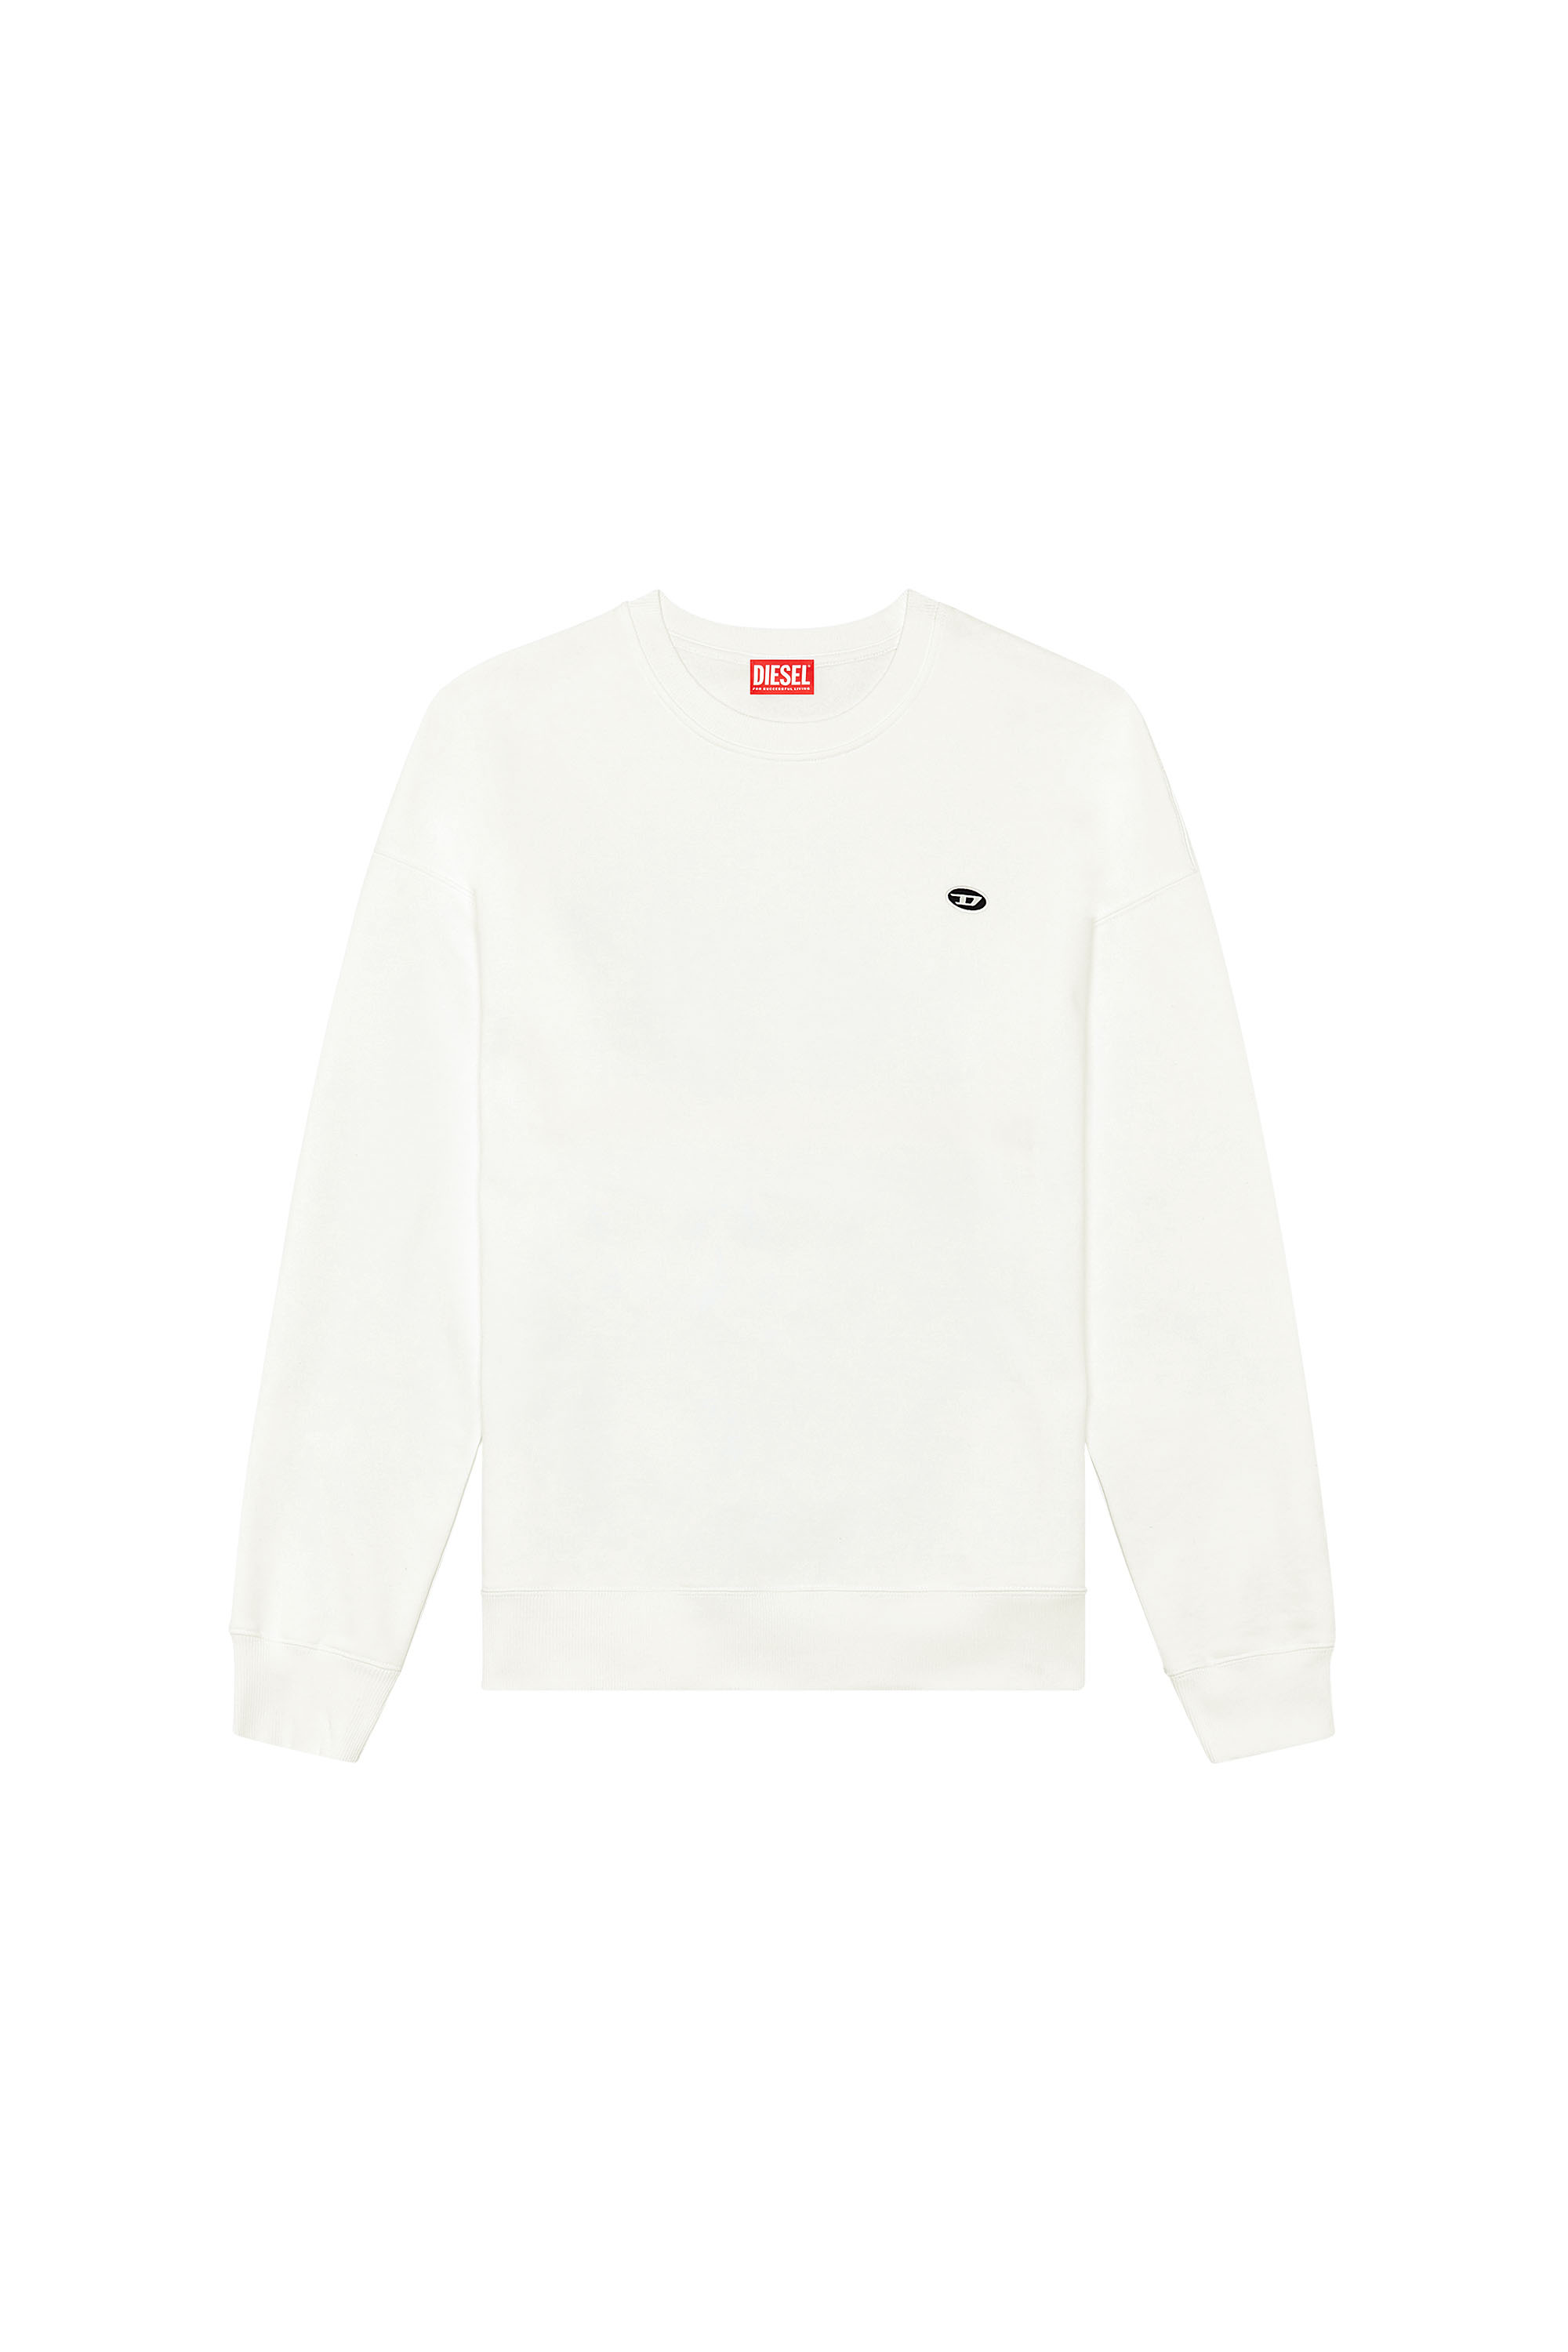 Diesel - S-ROB-DOVAL-PJ, Man Sweatshirt with oval D patch in White - Image 3